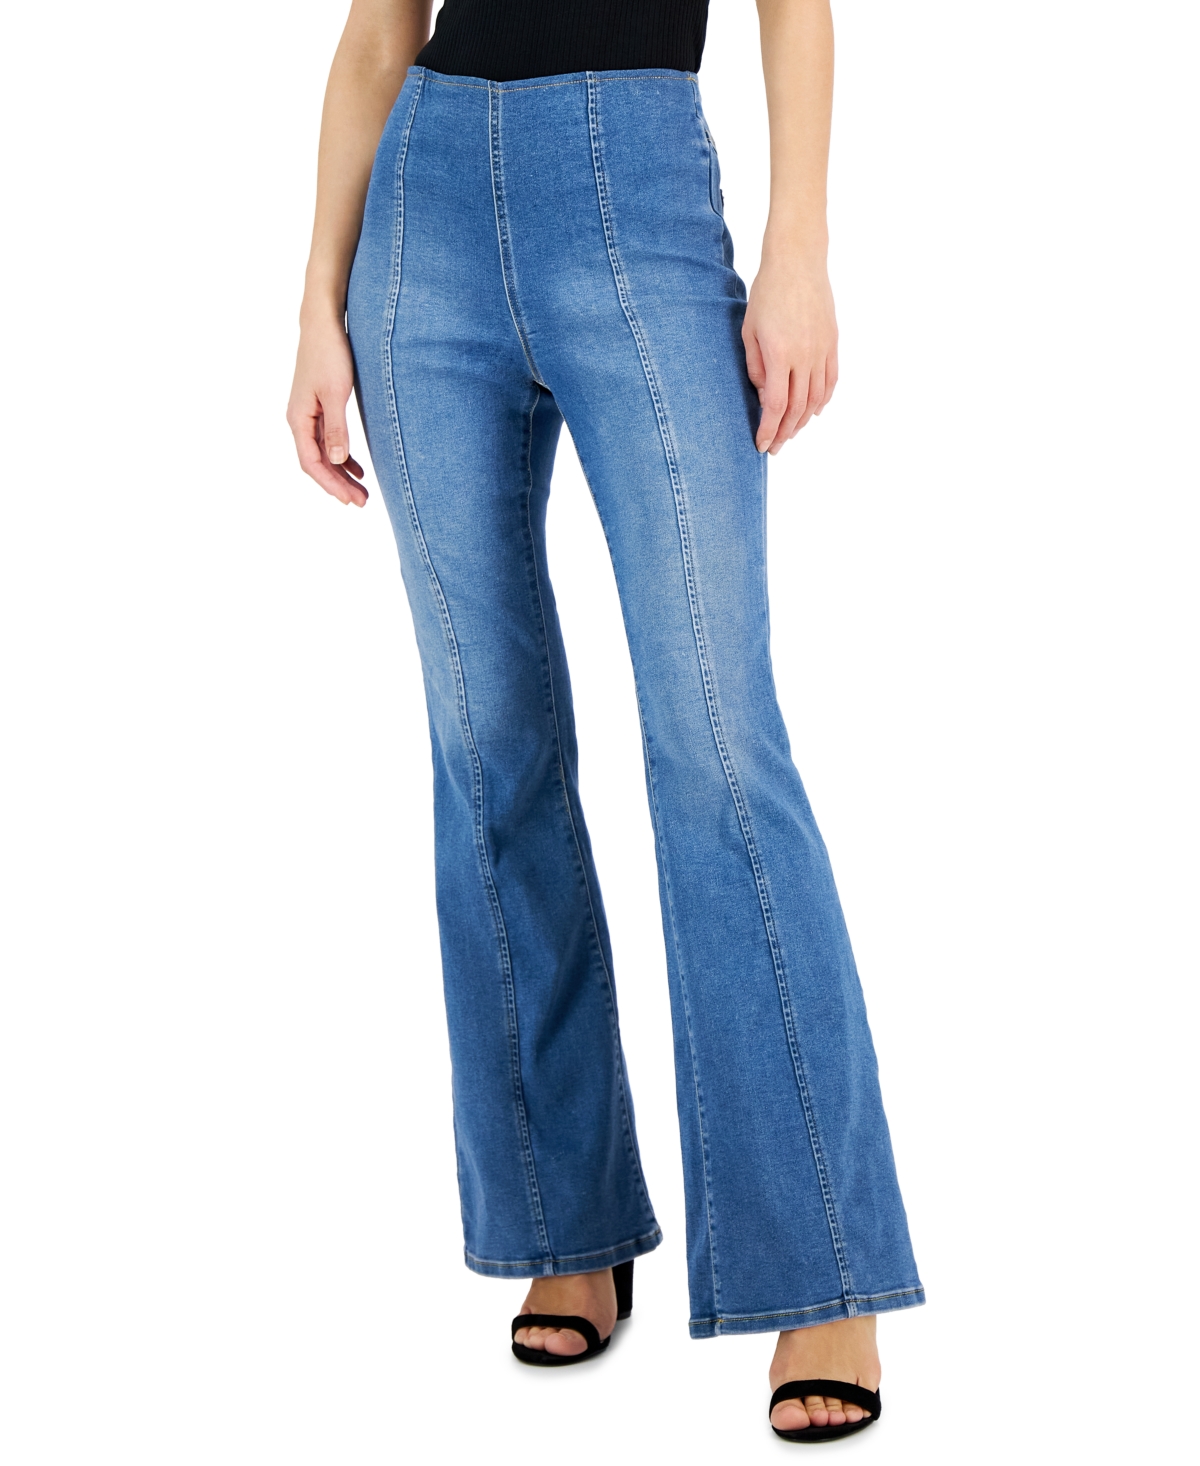  Inc International Concepts High-Rise Pull-On Flare-Leg Jeans, Created for Macy's